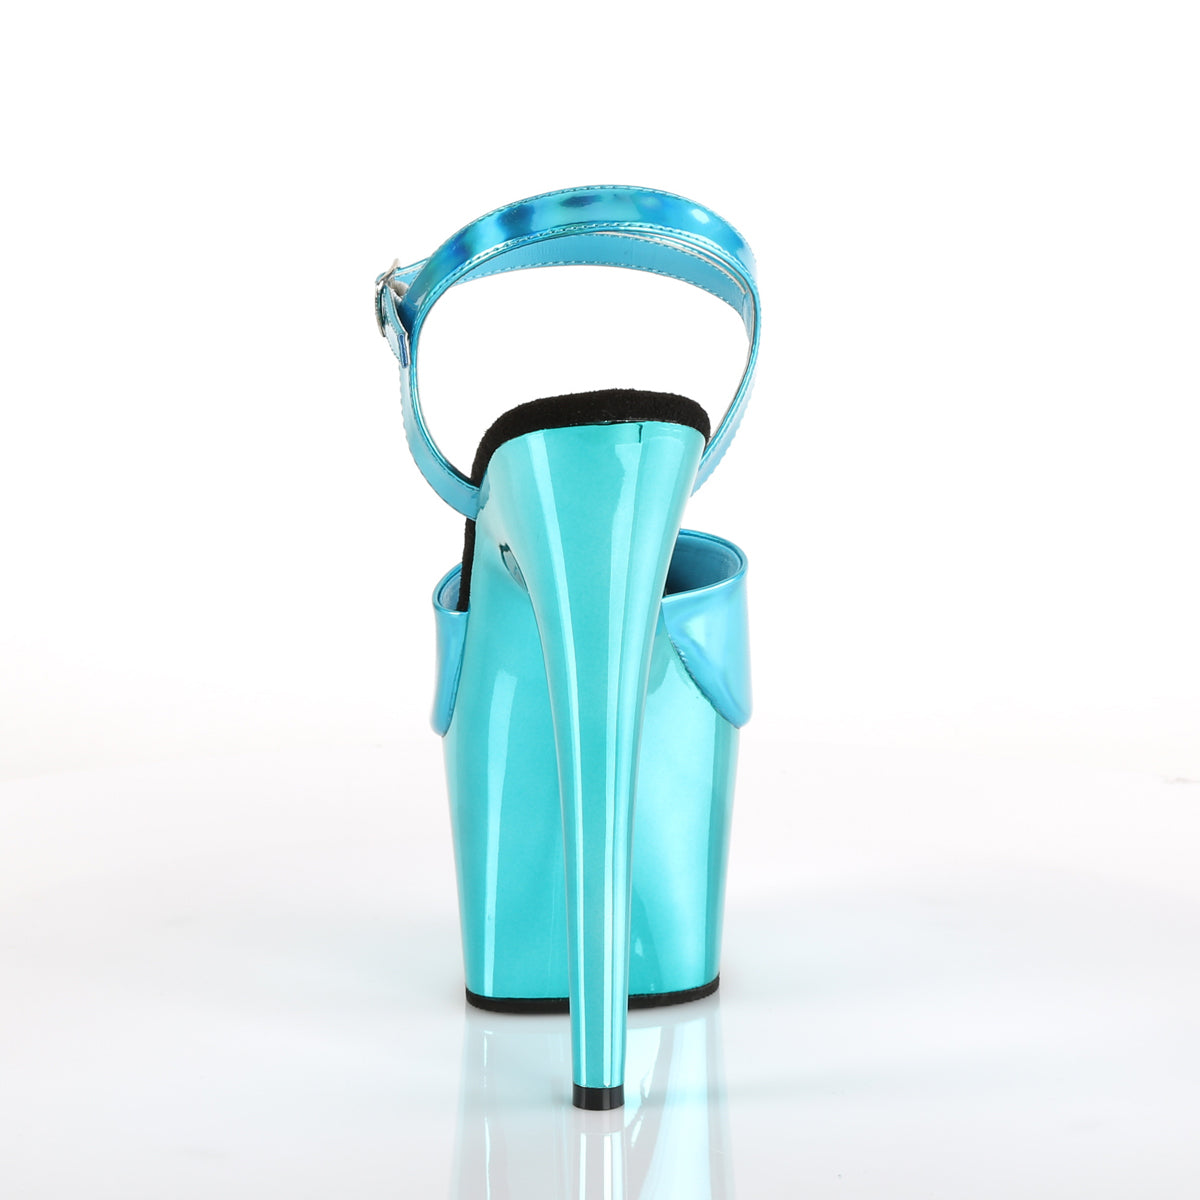 Pleaser Sandales pour femmes ADORE-709hgch hologramme turquoise / chrome turquoise